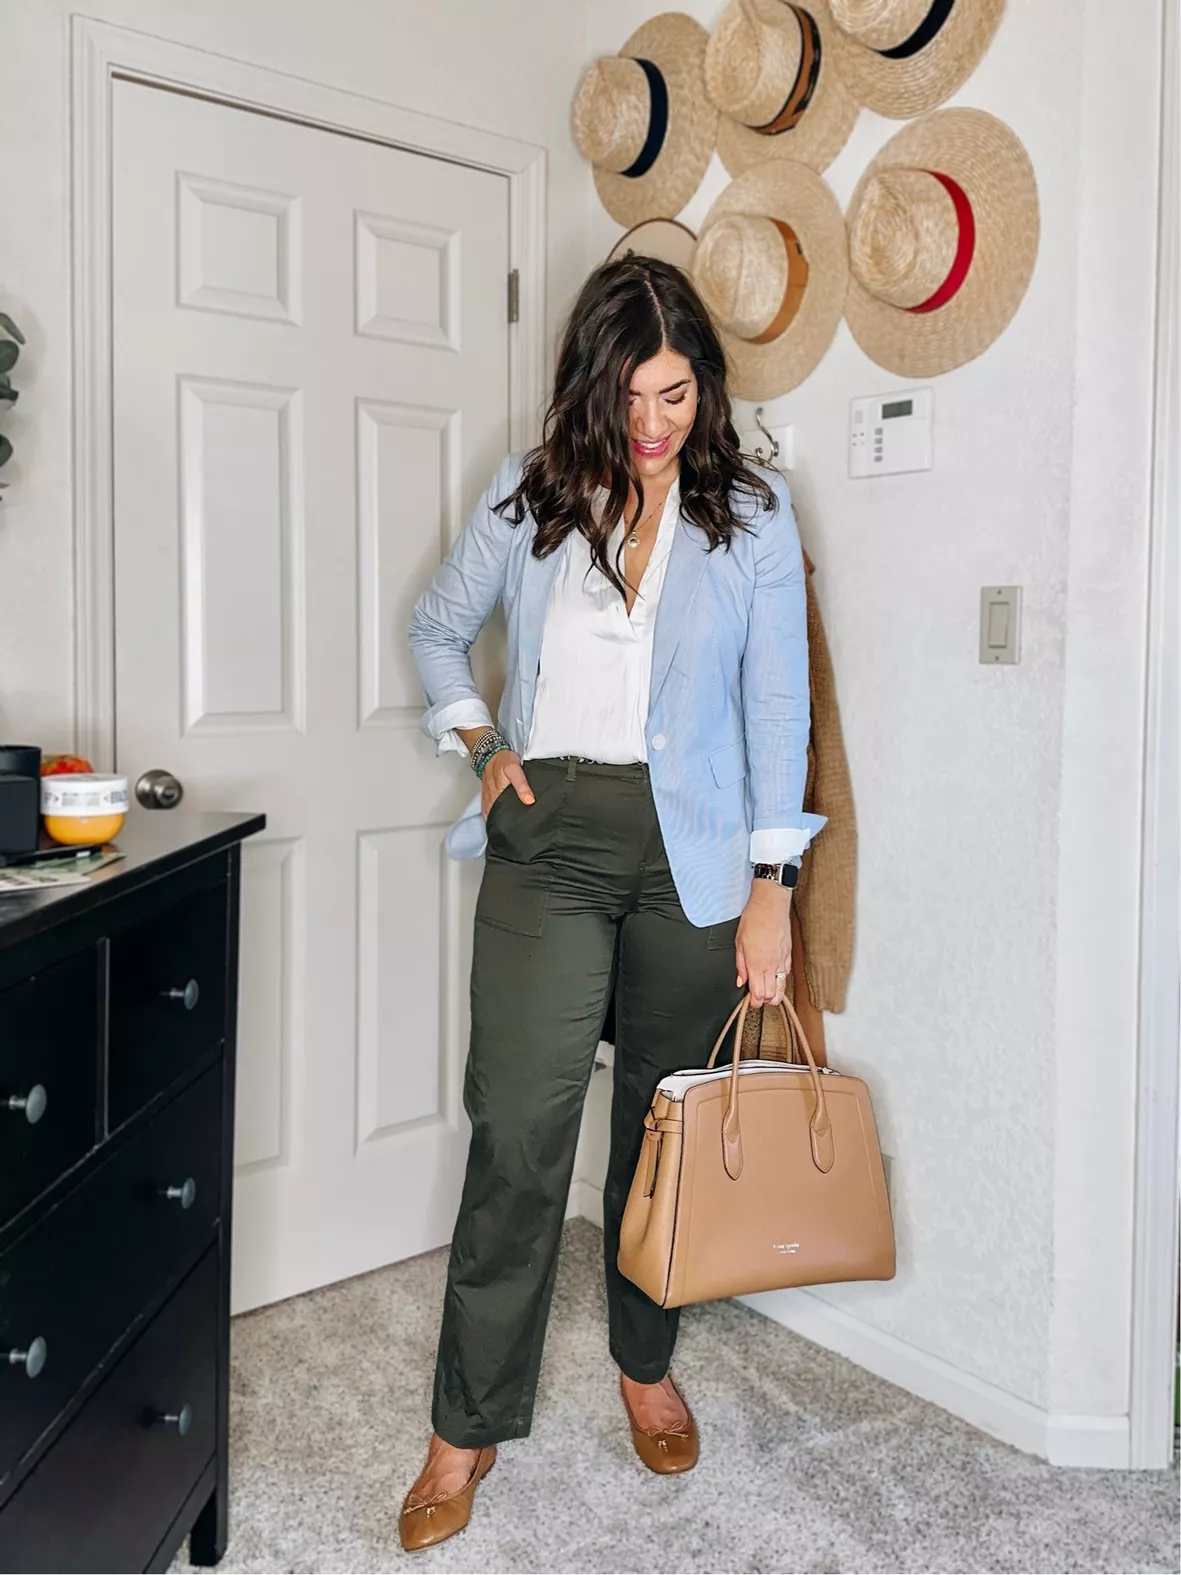 10 Business Casual Outfit Ideas for Women